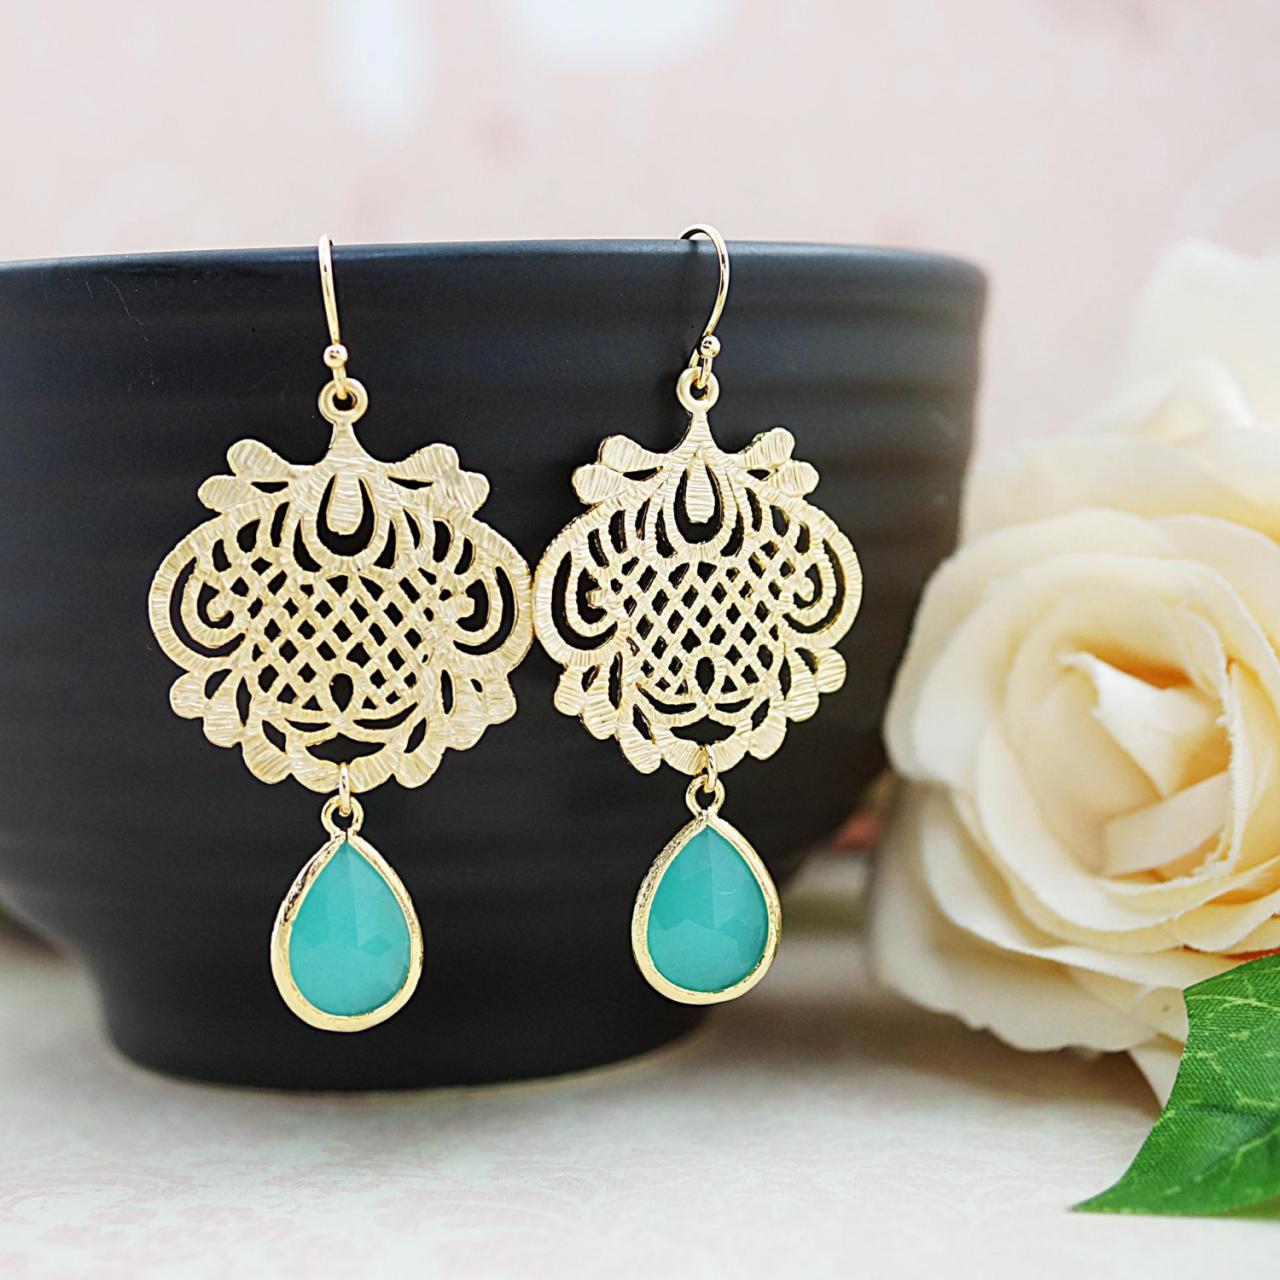 Wedding Jewelry Bridesmaid Gift Bridesmaid Earrings Bridesmaid Jewelry Dangle Earrings Oriental Charm And Mint Opal Glass Drop Earrings